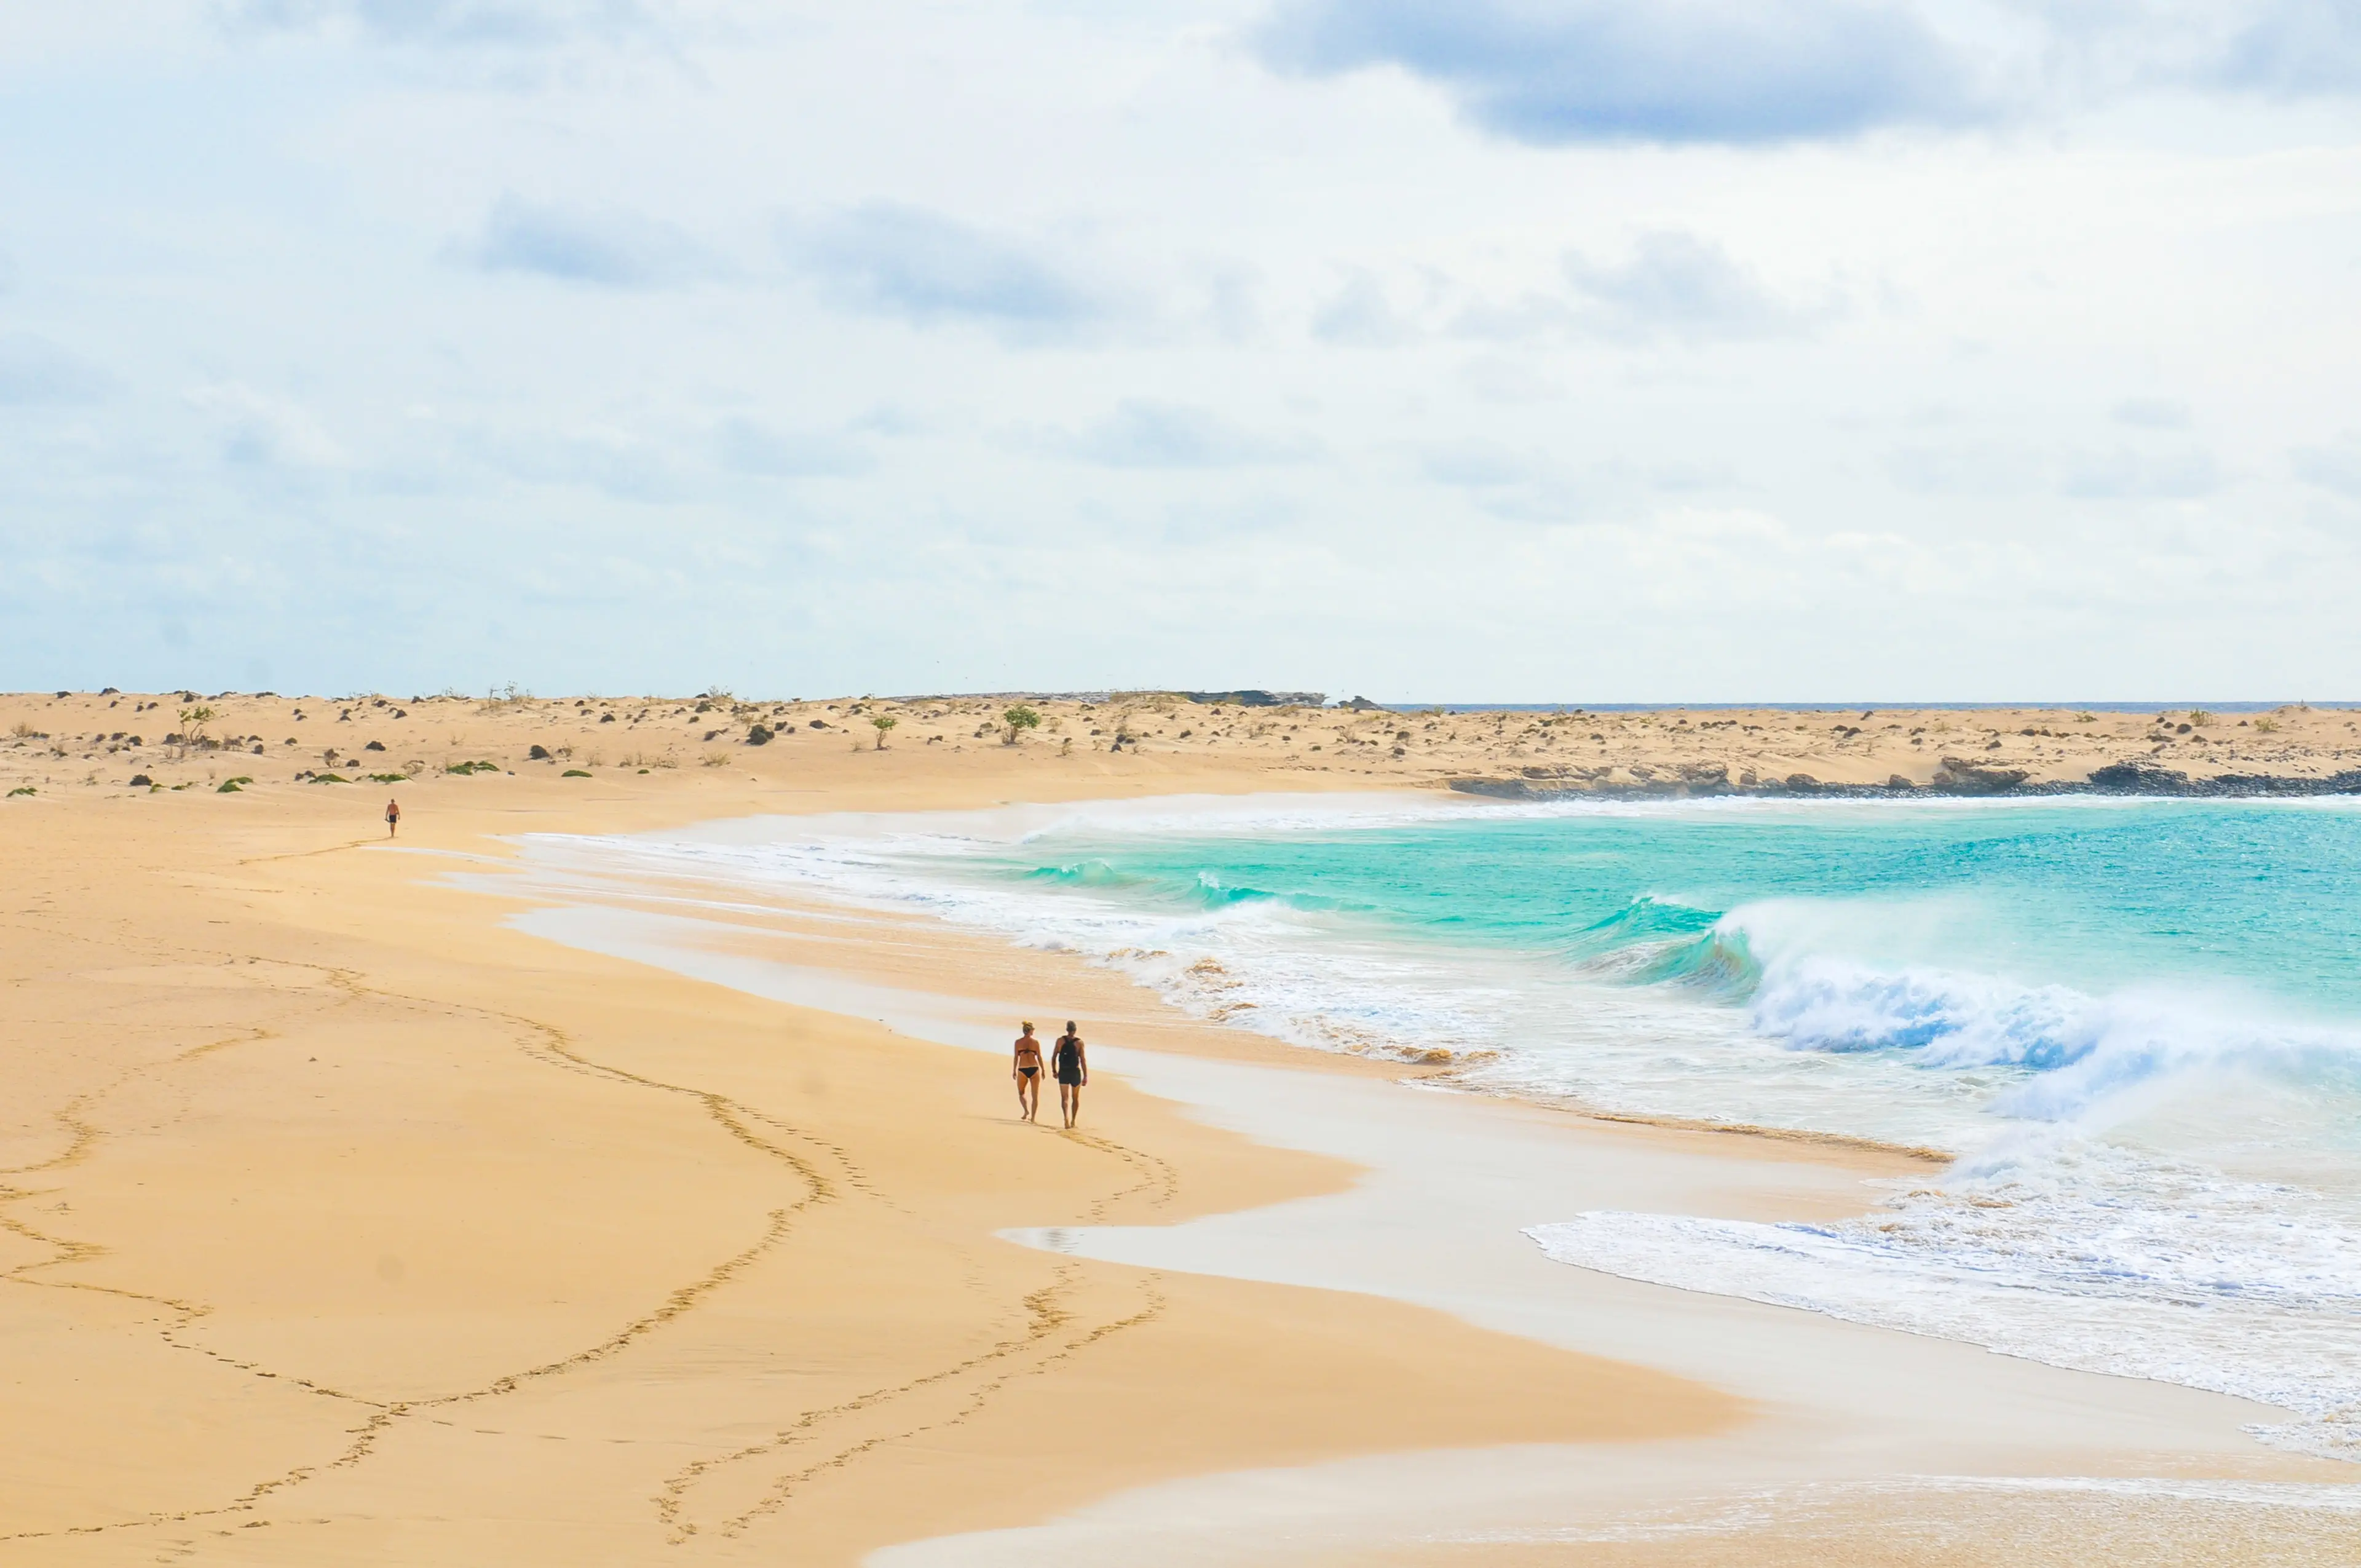 5-Day Solo Culinary and Sightseeing Adventure in Cape Verde